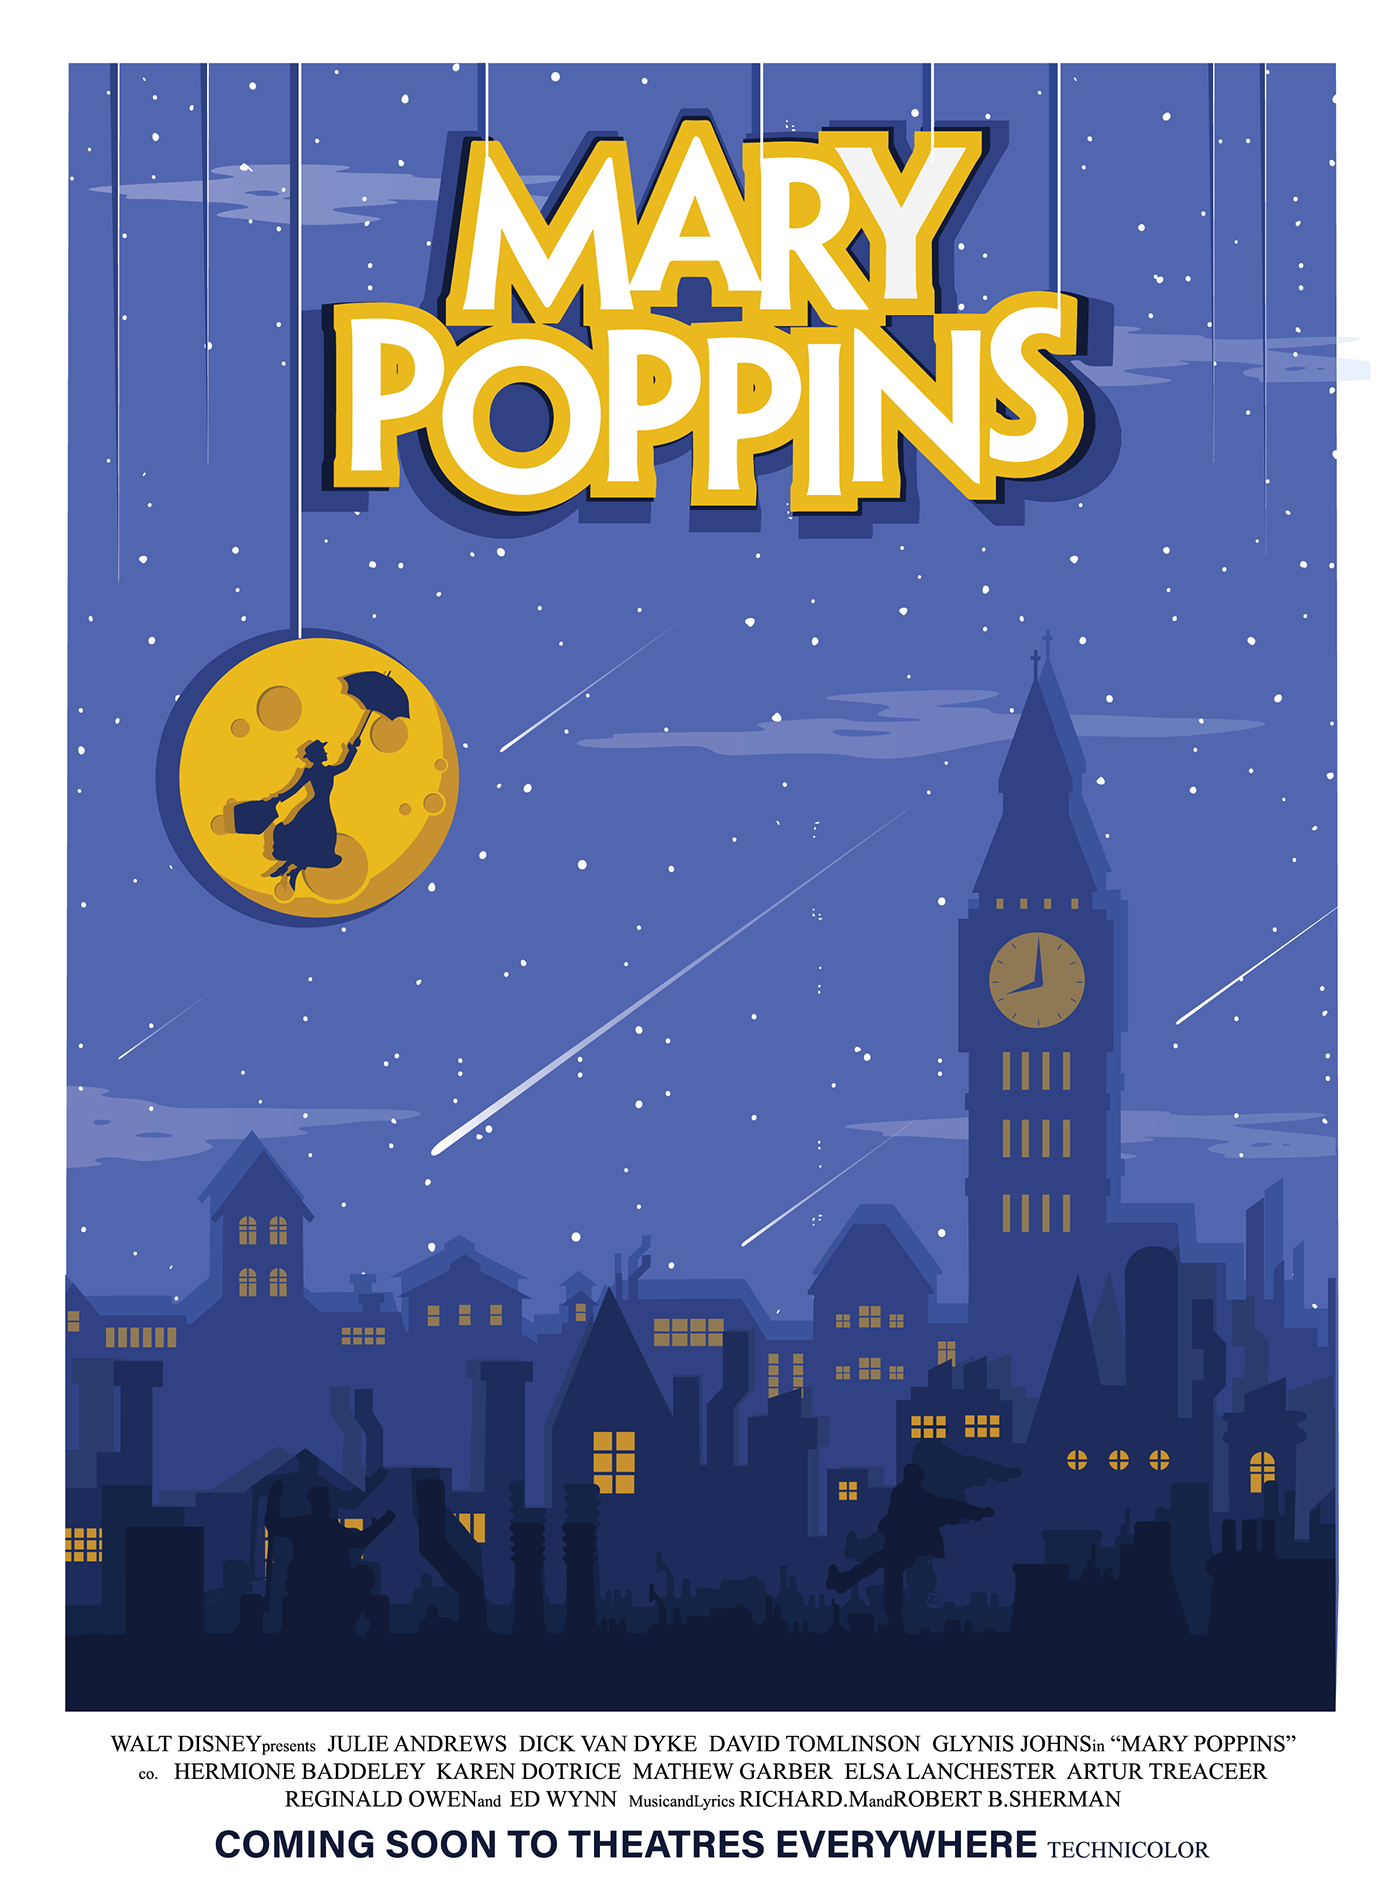 Advertising  Film   graphic graphic design  Mary marypoppins Poppins poster